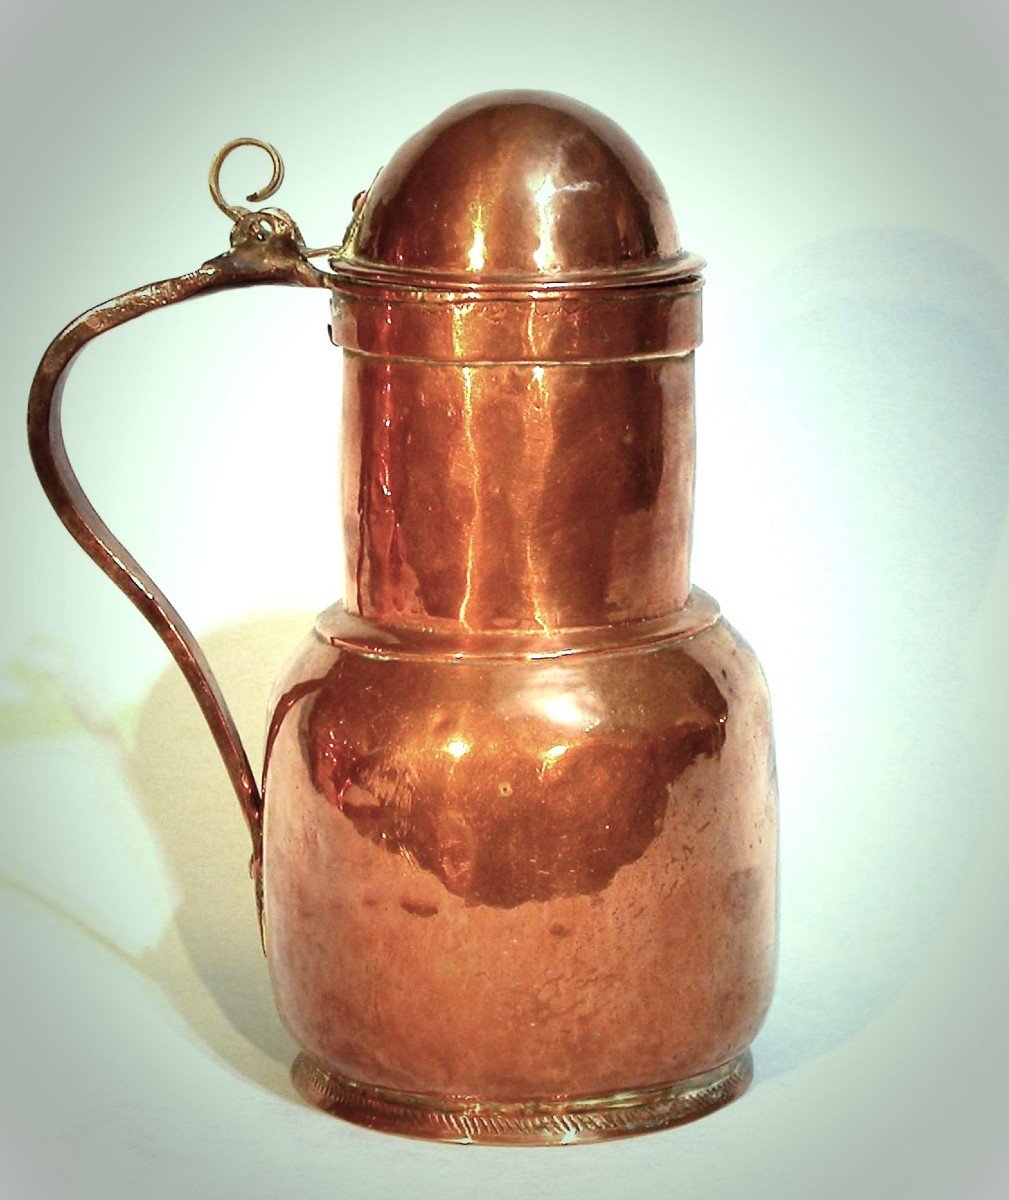 Copper Jug (marked) - Eastern France, 18th Century